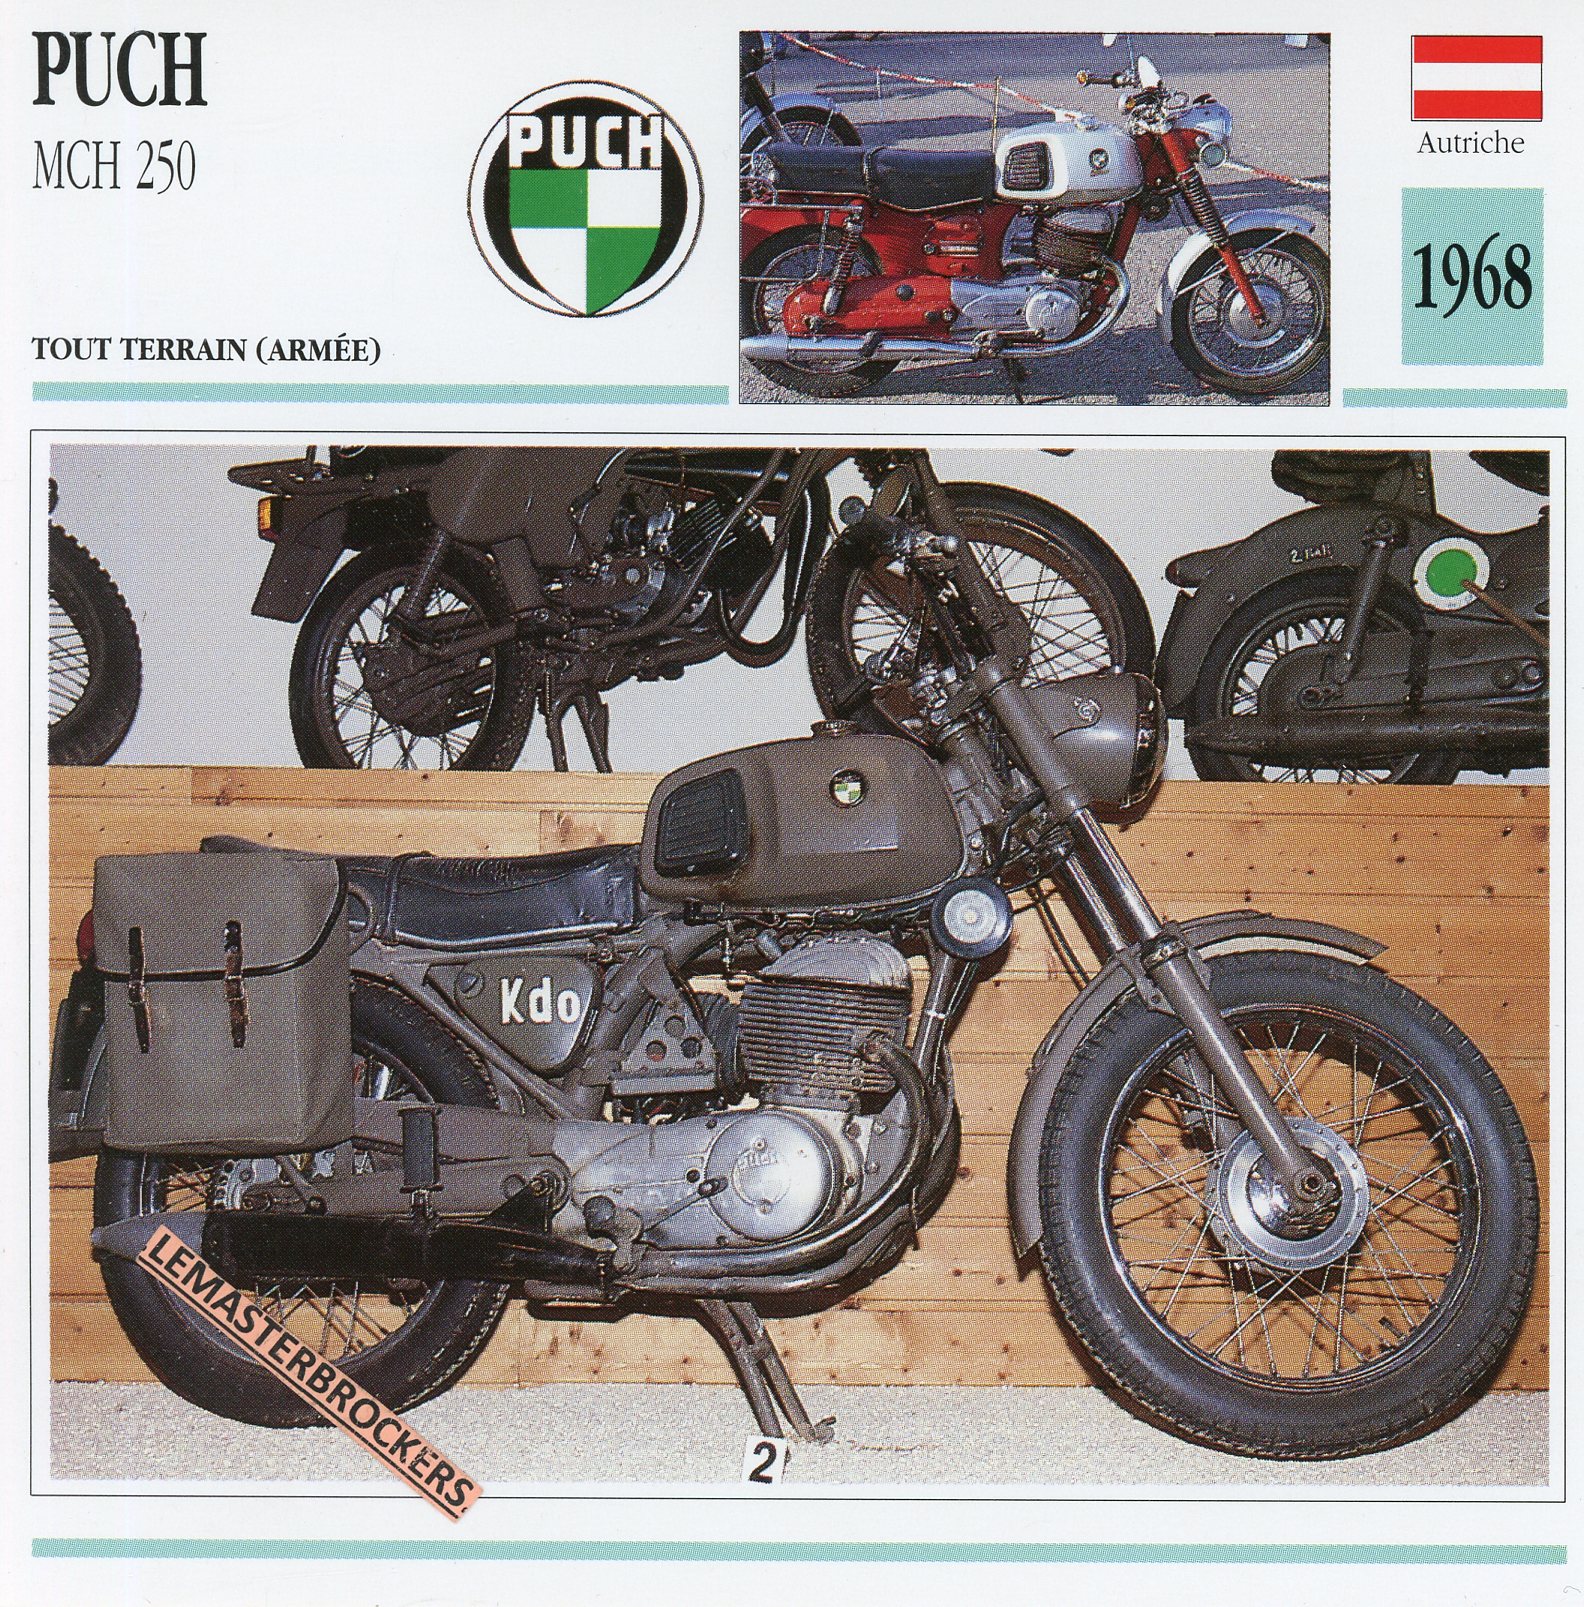 PUCH-250-MCH-1968-FICHE-MOTO-MOTORCYCLE-CARDS-ATLAS-LEMASTERBROCKERS